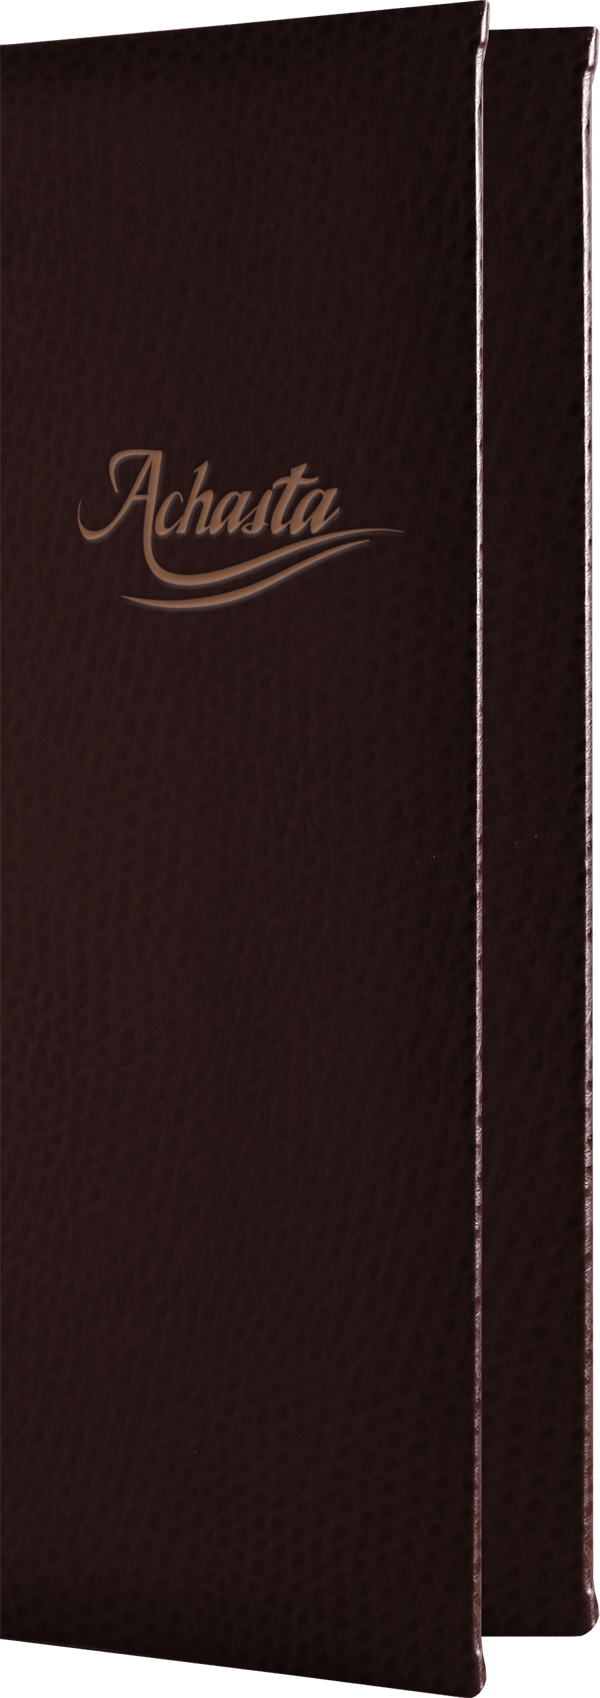 Chesterfield Golf Clubhouse Menu Covers are perfect for country clubs and golf venues.